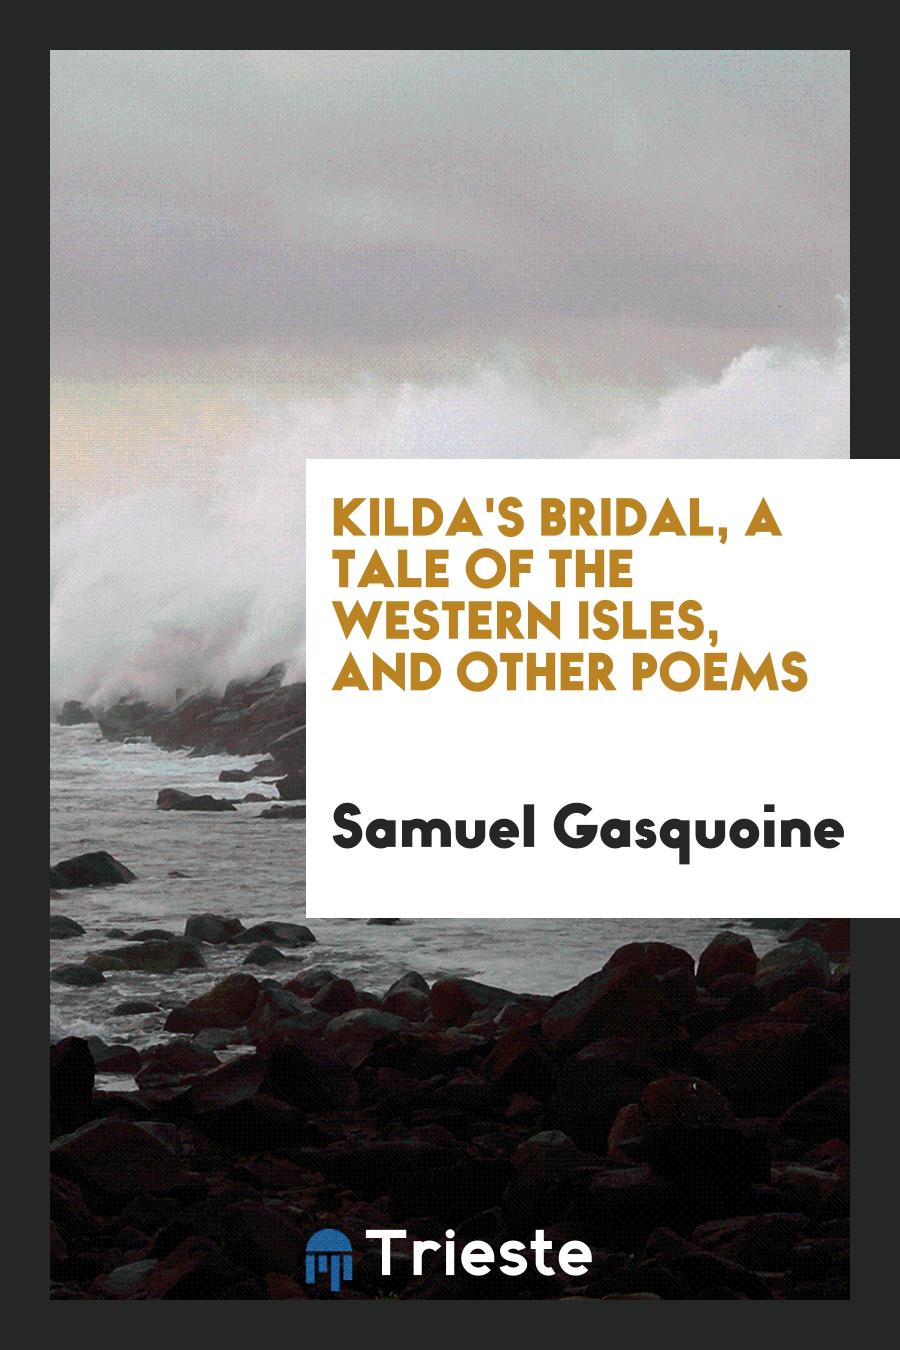 Kilda's Bridal, a Tale of the Western Isles, and Other Poems